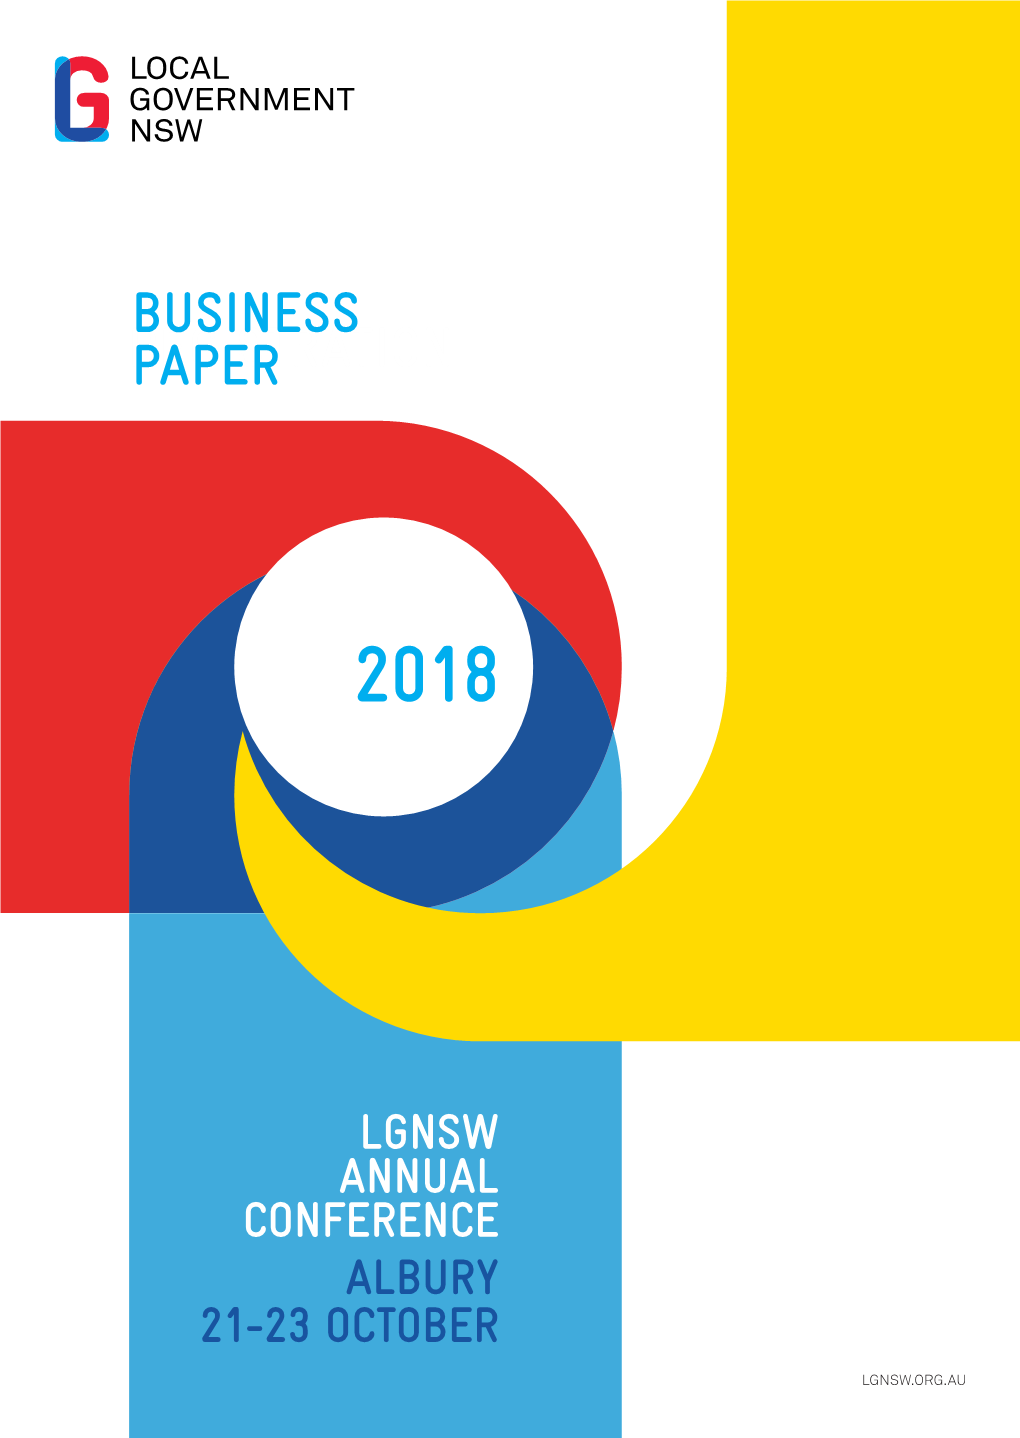 LGNSW 2018 Conference Business Paper